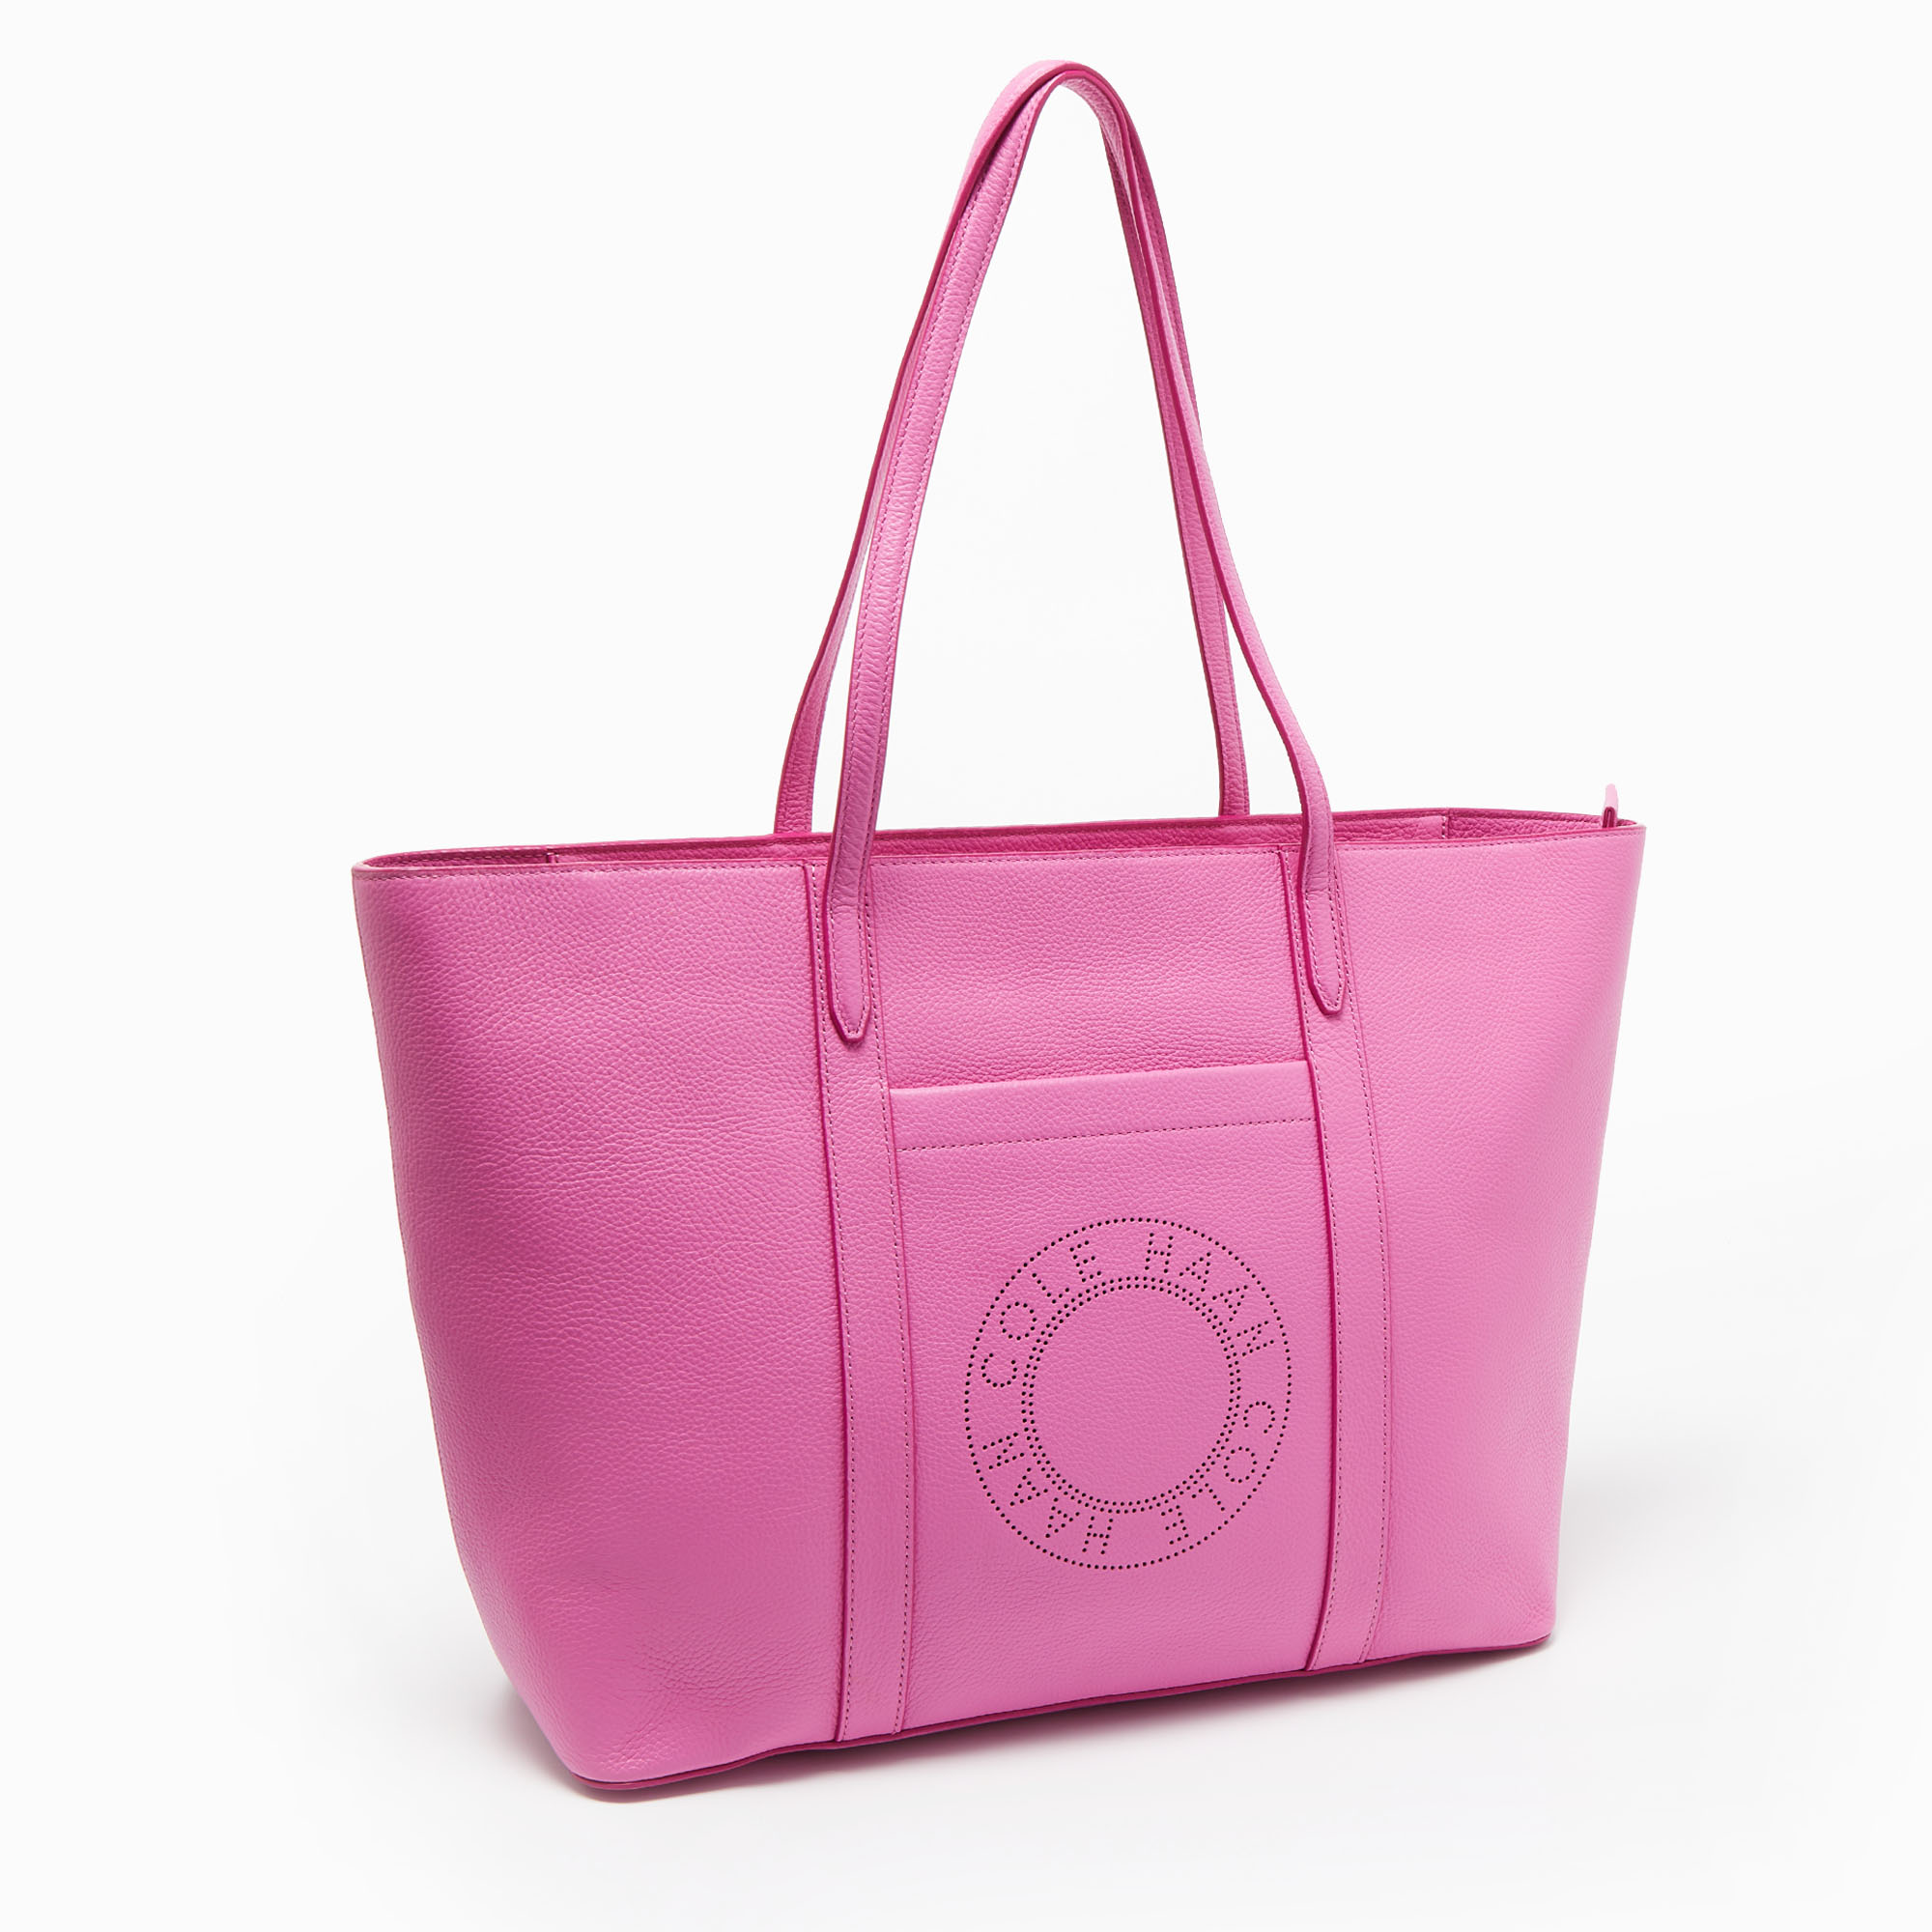 Cole Haan Pink Leather Zip Shopper Tote